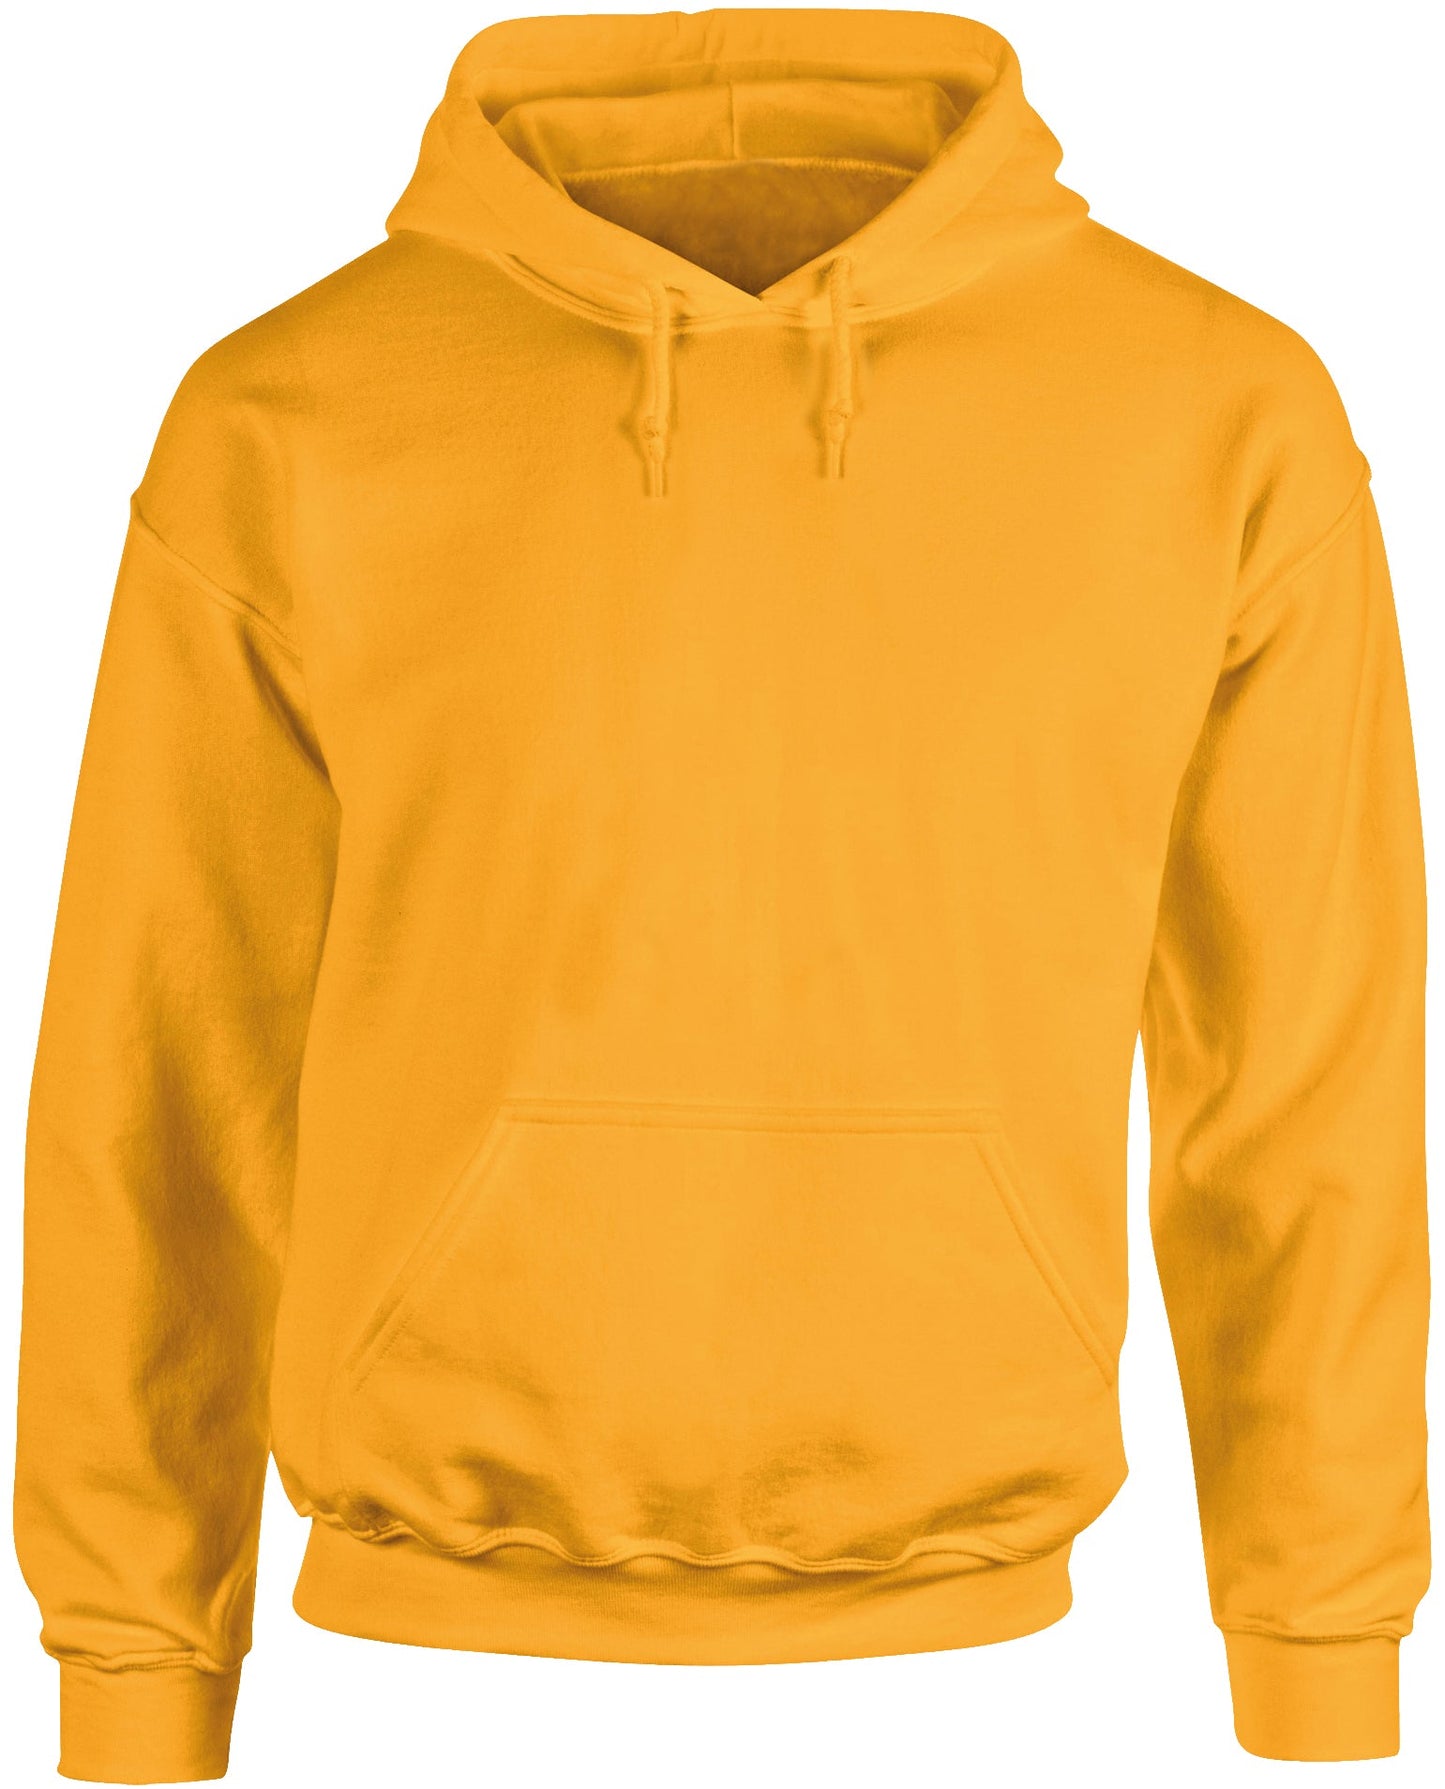 Adults Workwear Hoodie Just Text, 5 or more receive £3 per item discount!